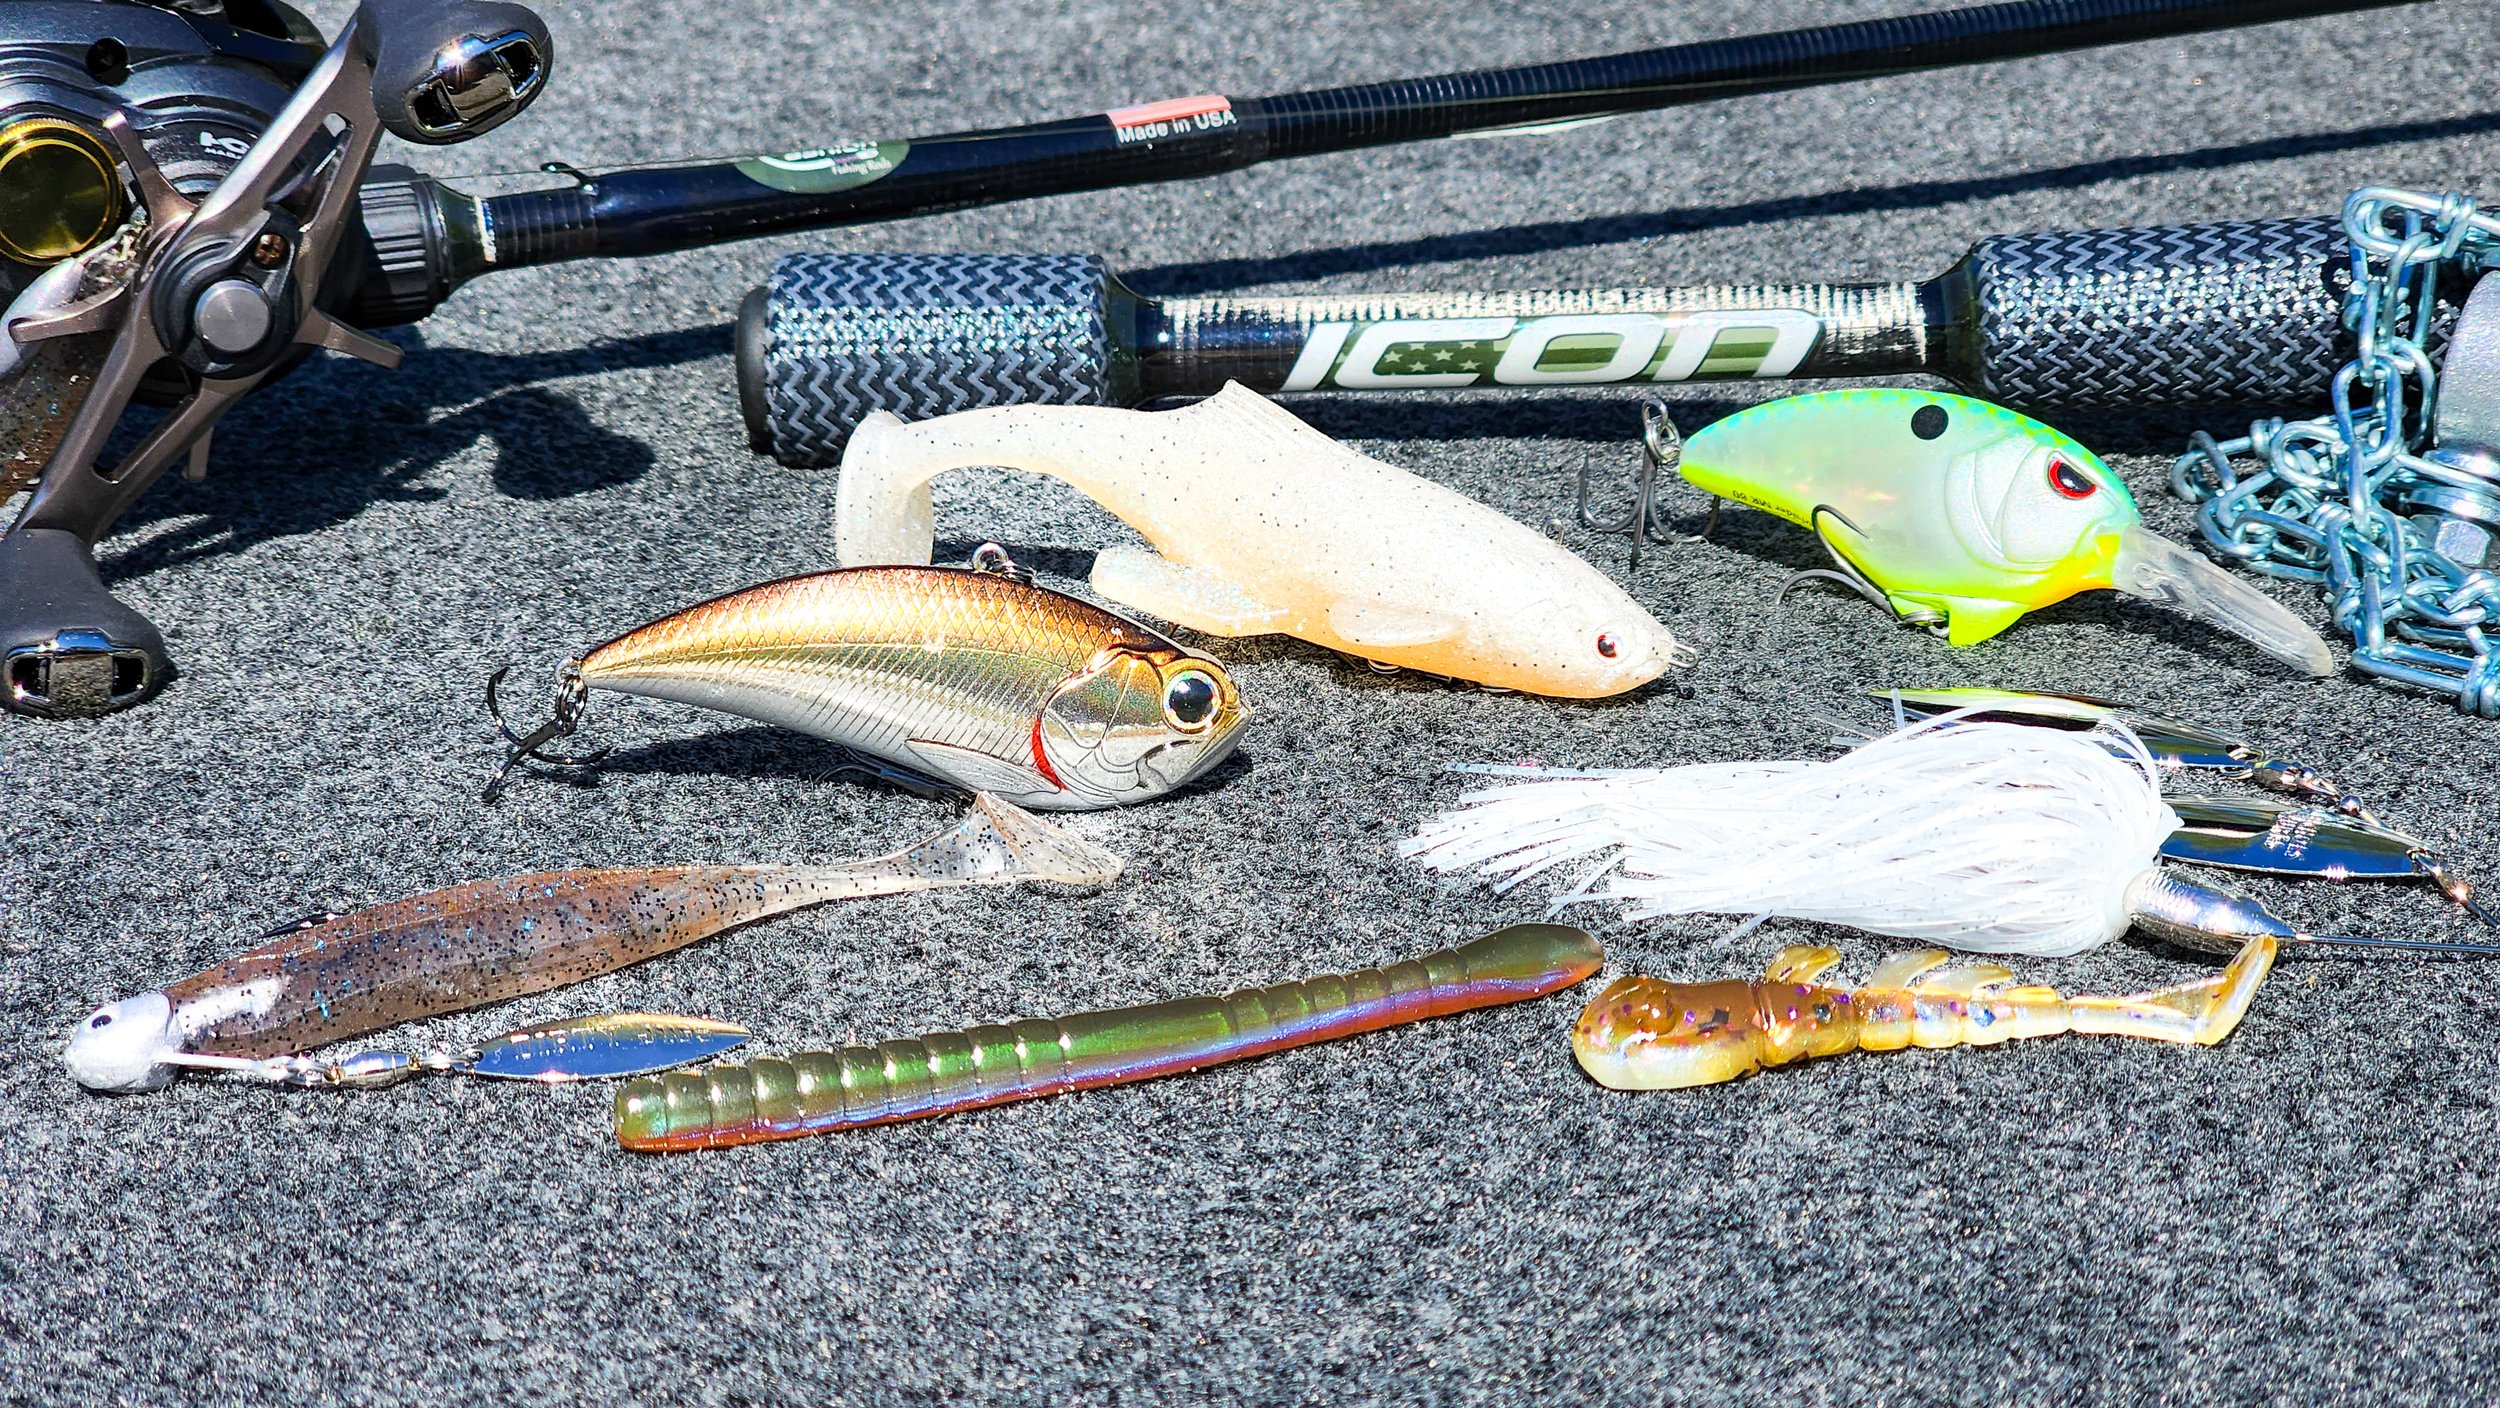 Gear Review! New Lures Bait Finesse Rods, Swimbaits, and Tackle